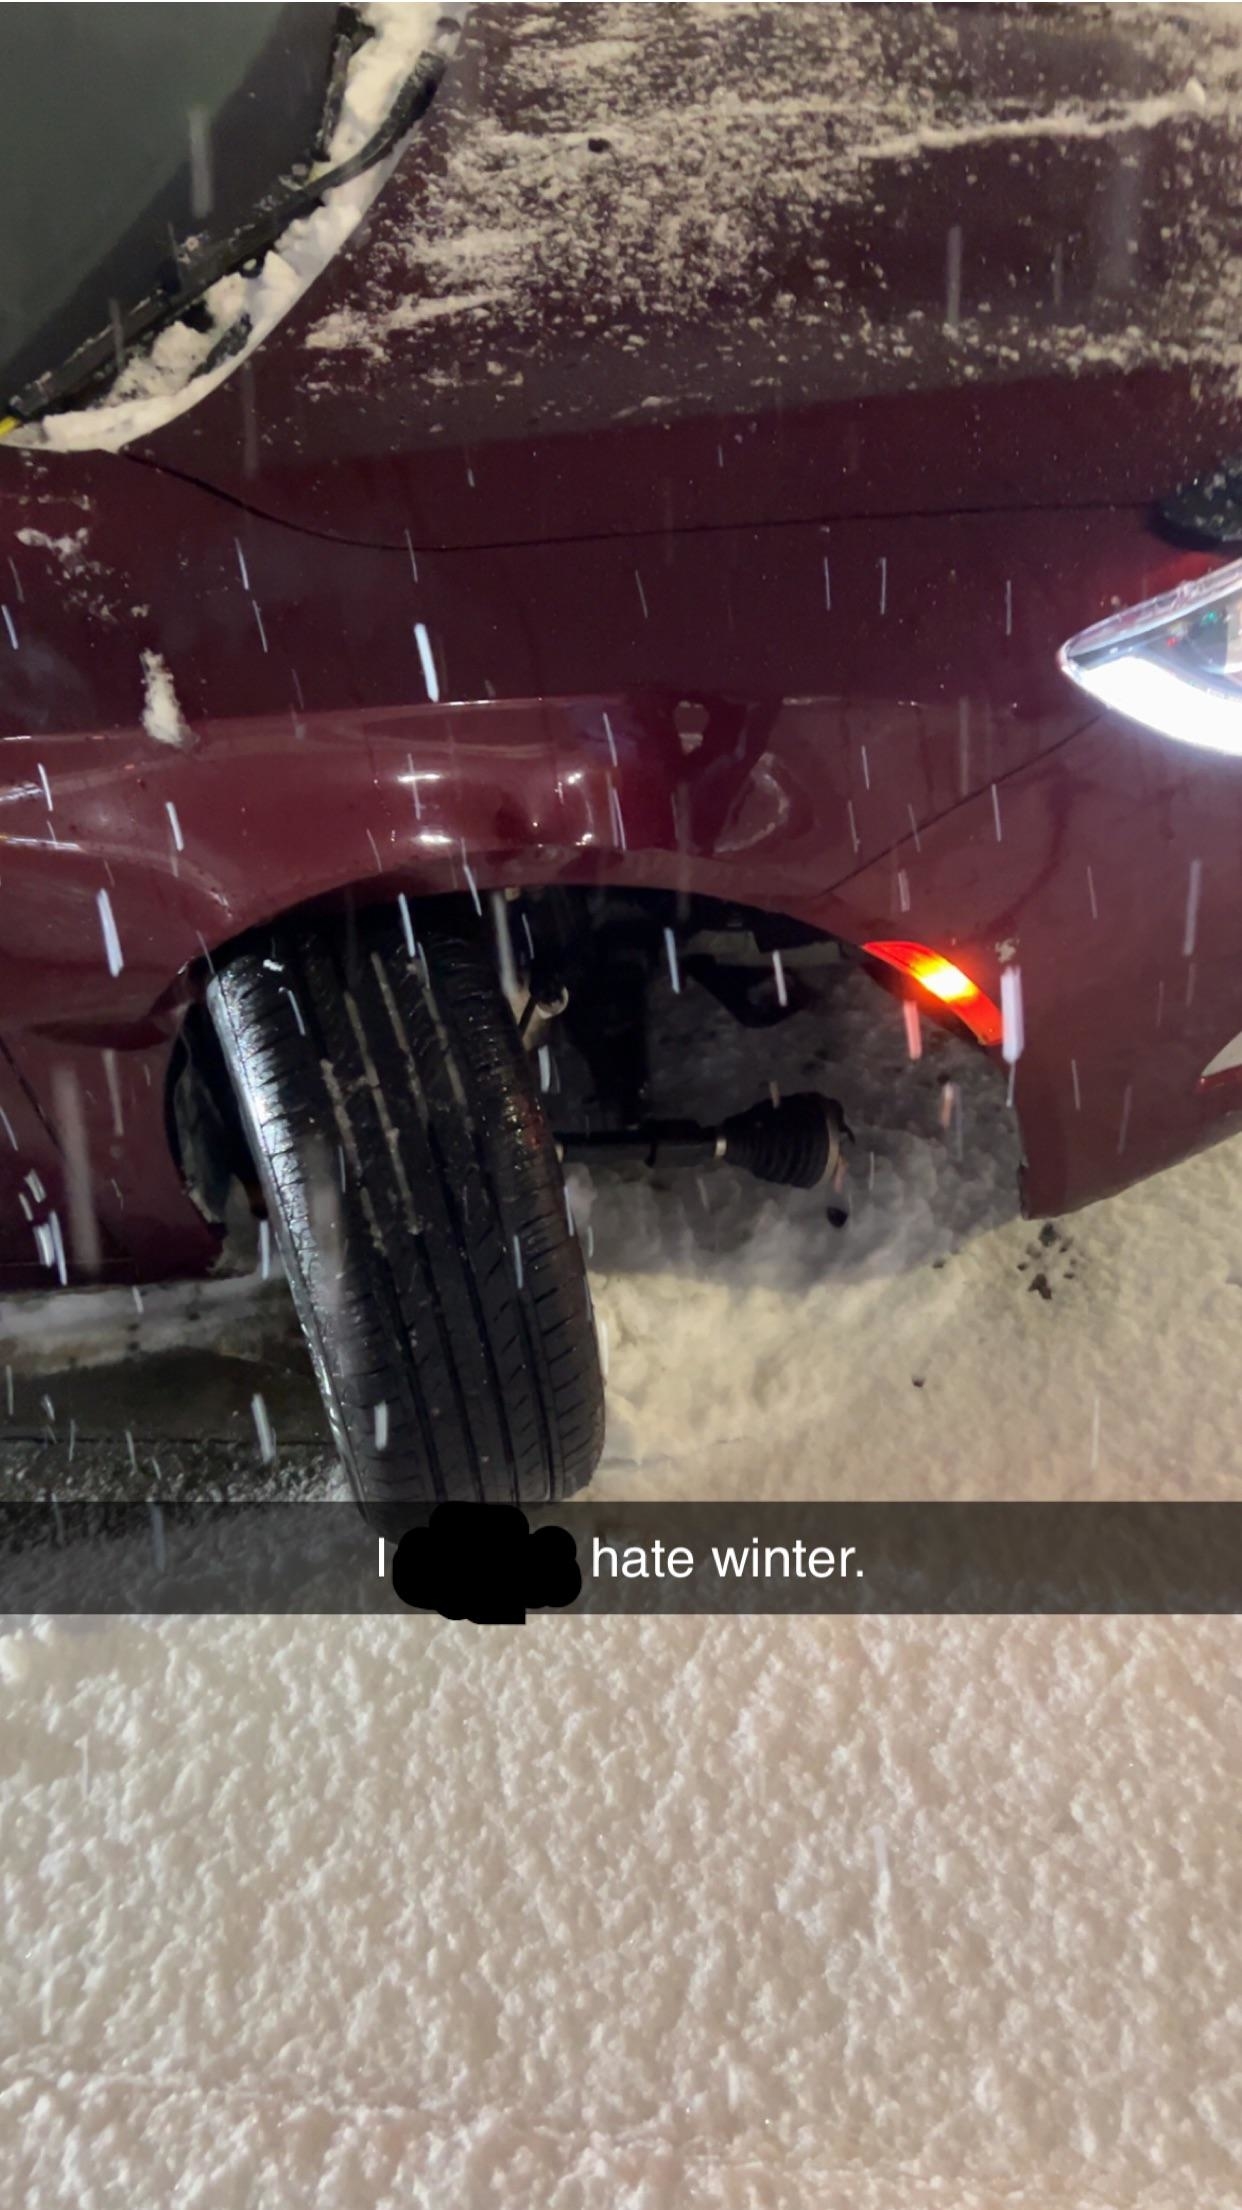 &quot;I hate winter&quot; showing a car in the snow with a wheel at a very strange angle